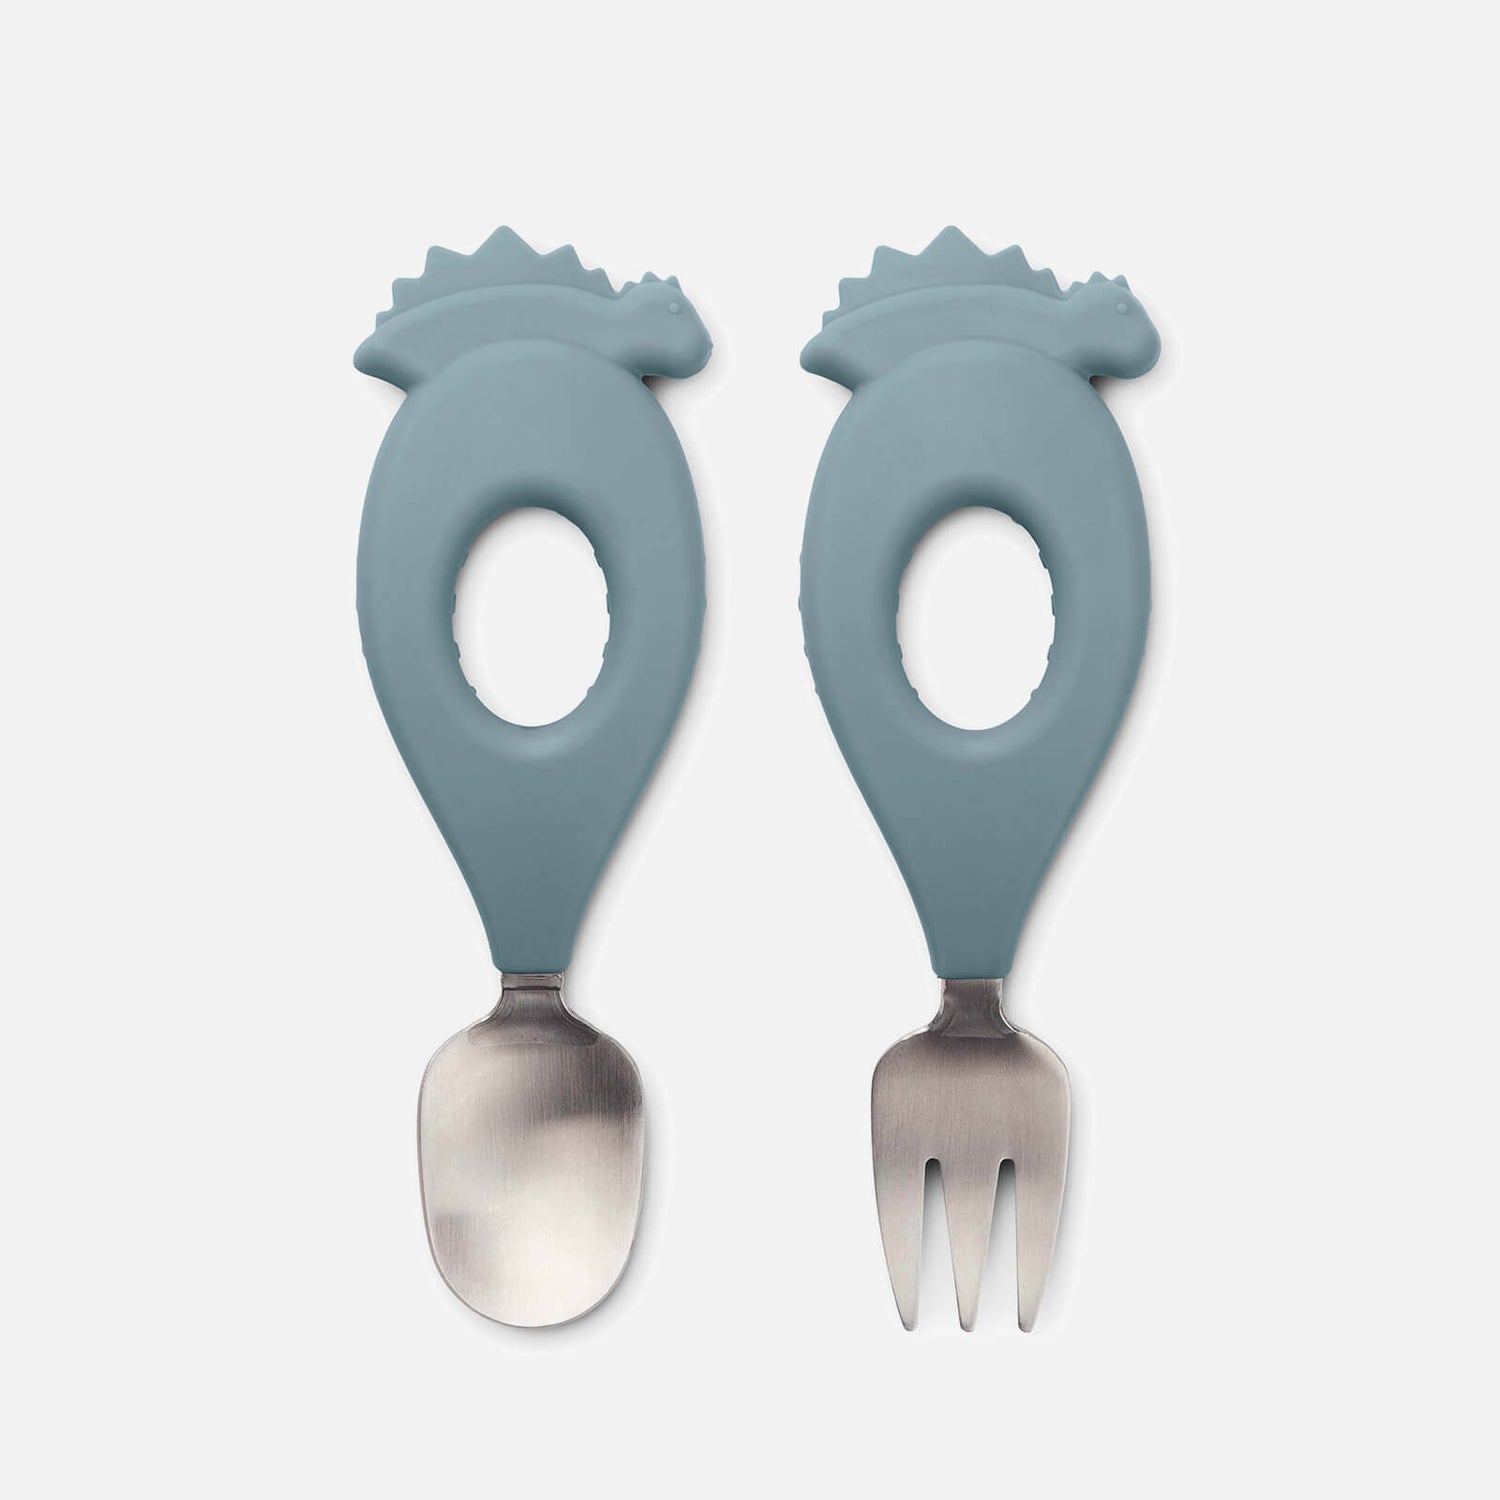 Liewood Stanley Baby Cutlery Set - Dino/Whale Blue